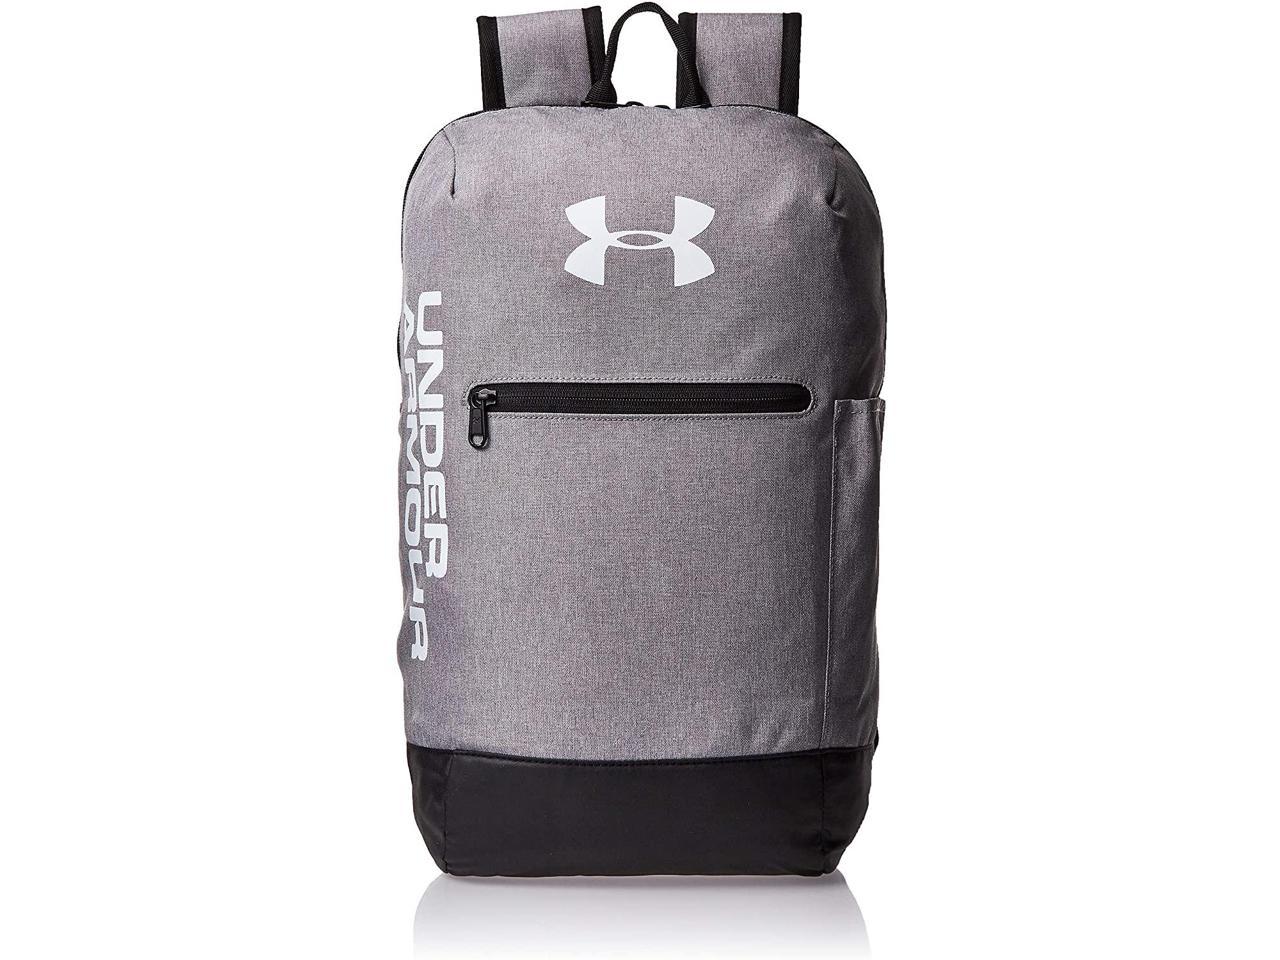 OSFA Bag with Storage Slot for Laptops and Tablets Halo Gray/Black/Black Under Armour Unisexs Patterson Sports Backpack Water Repellent Gym Rucksack with Adjustable Straps 014